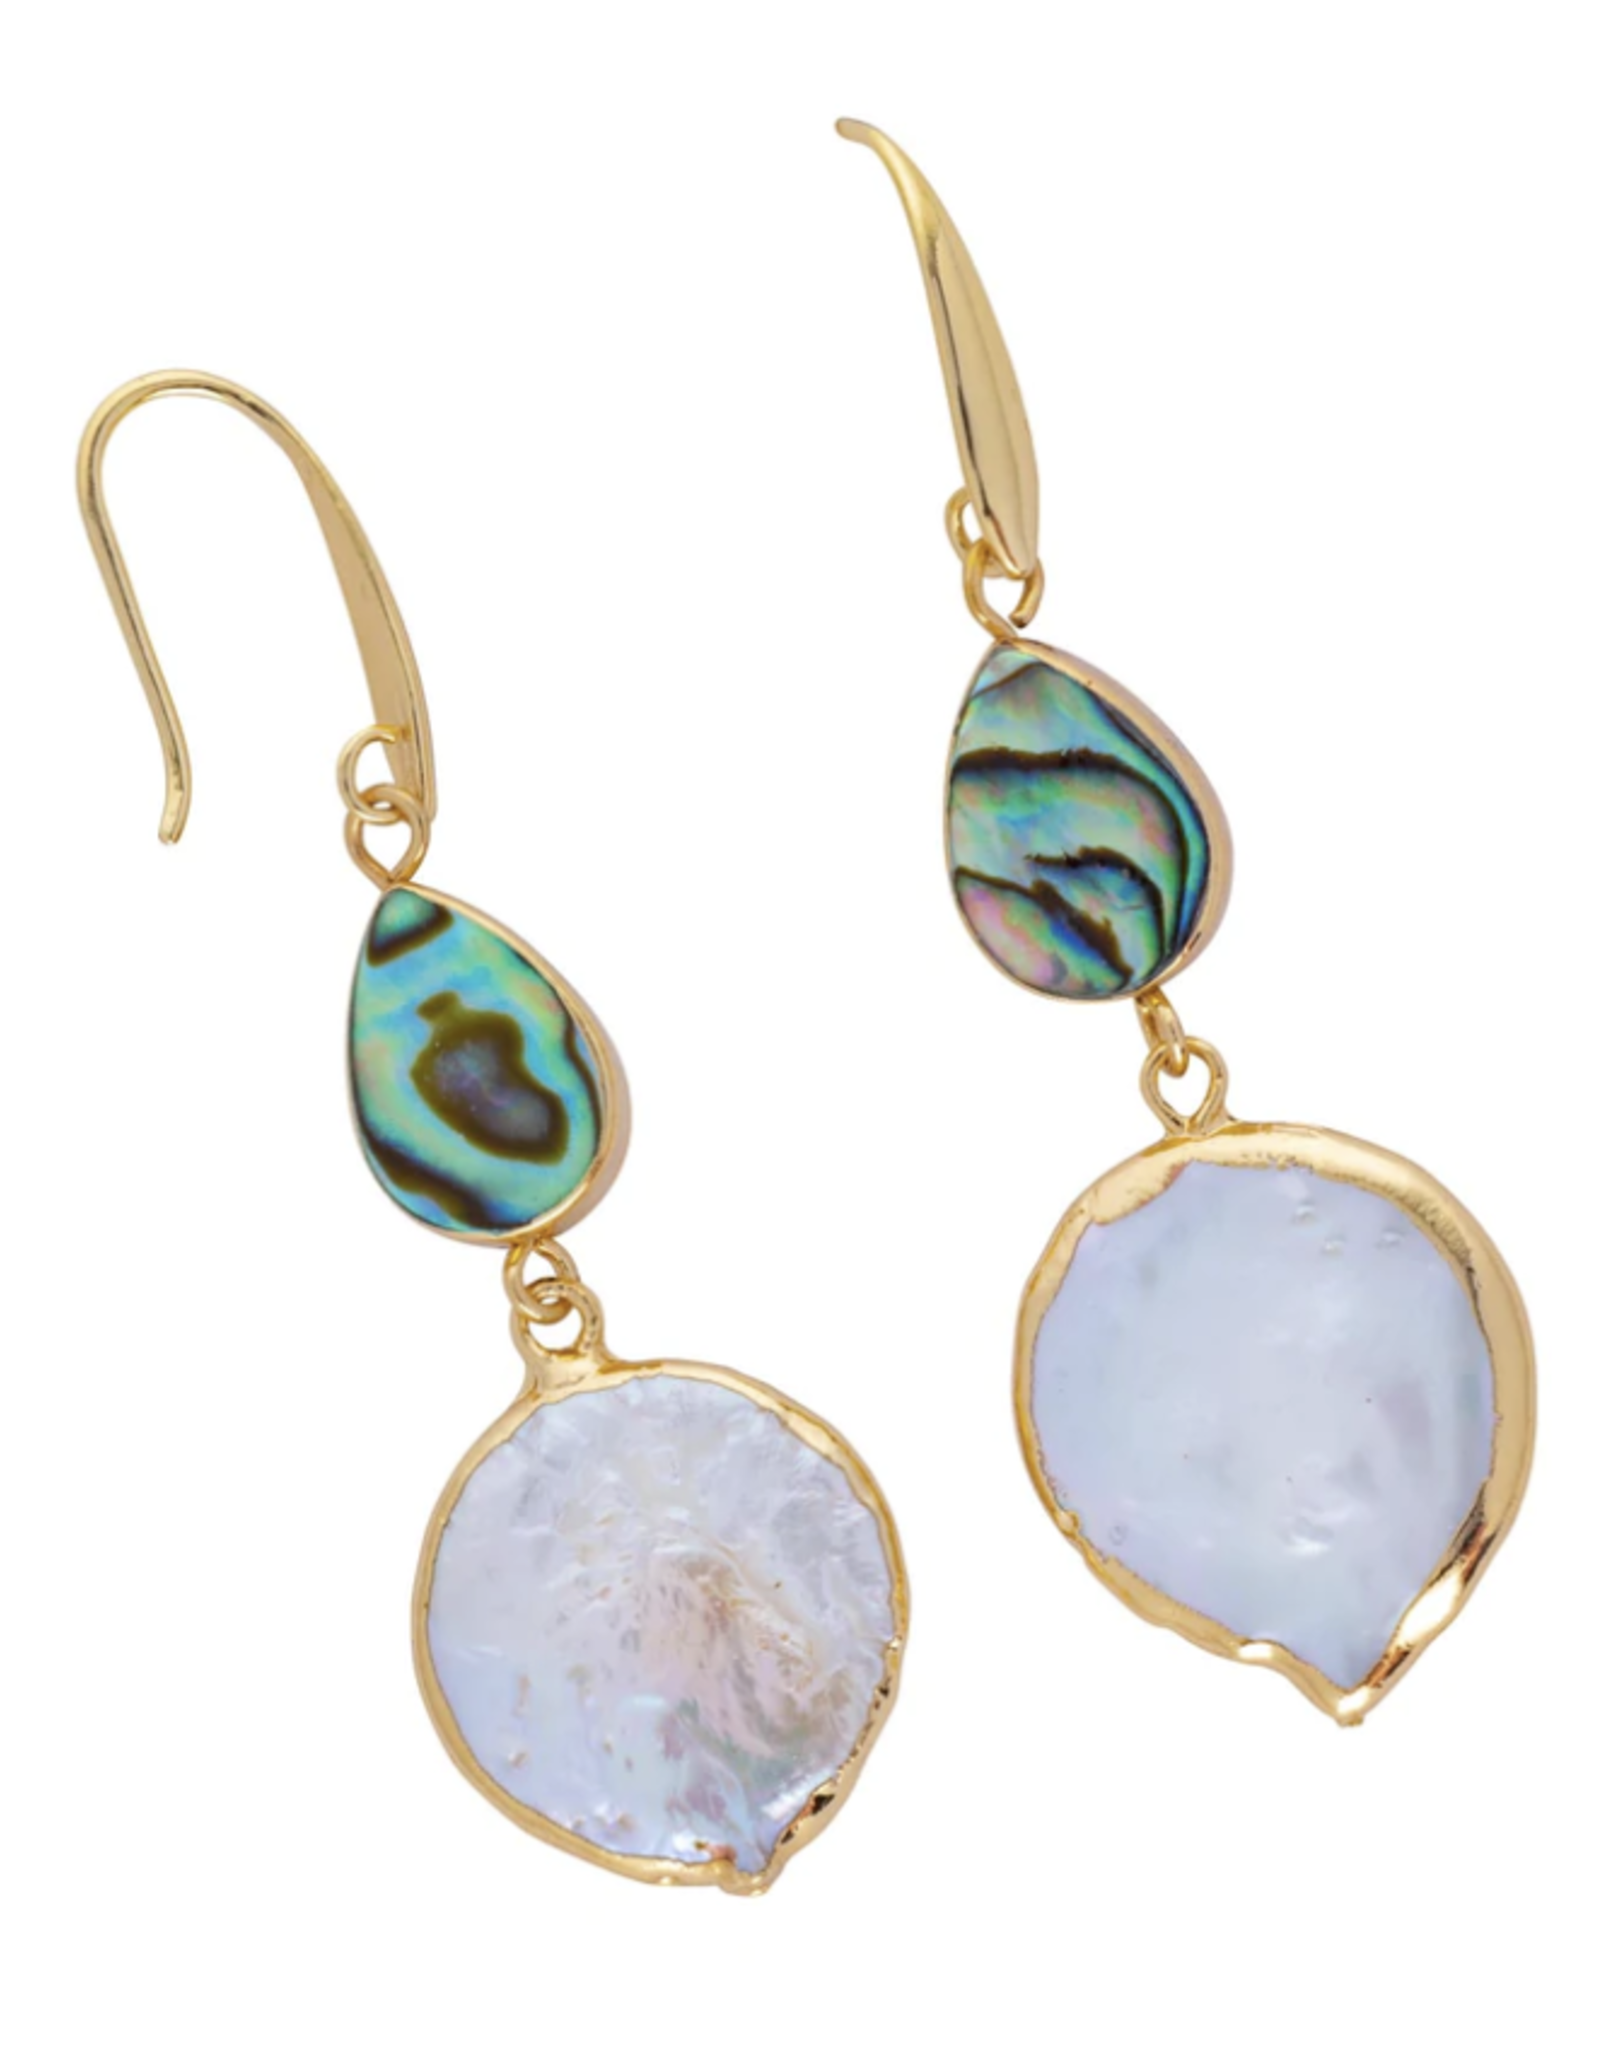 The Beach and Back Ocean Springs Double Drop Abalone and Coin Pearl Earrings